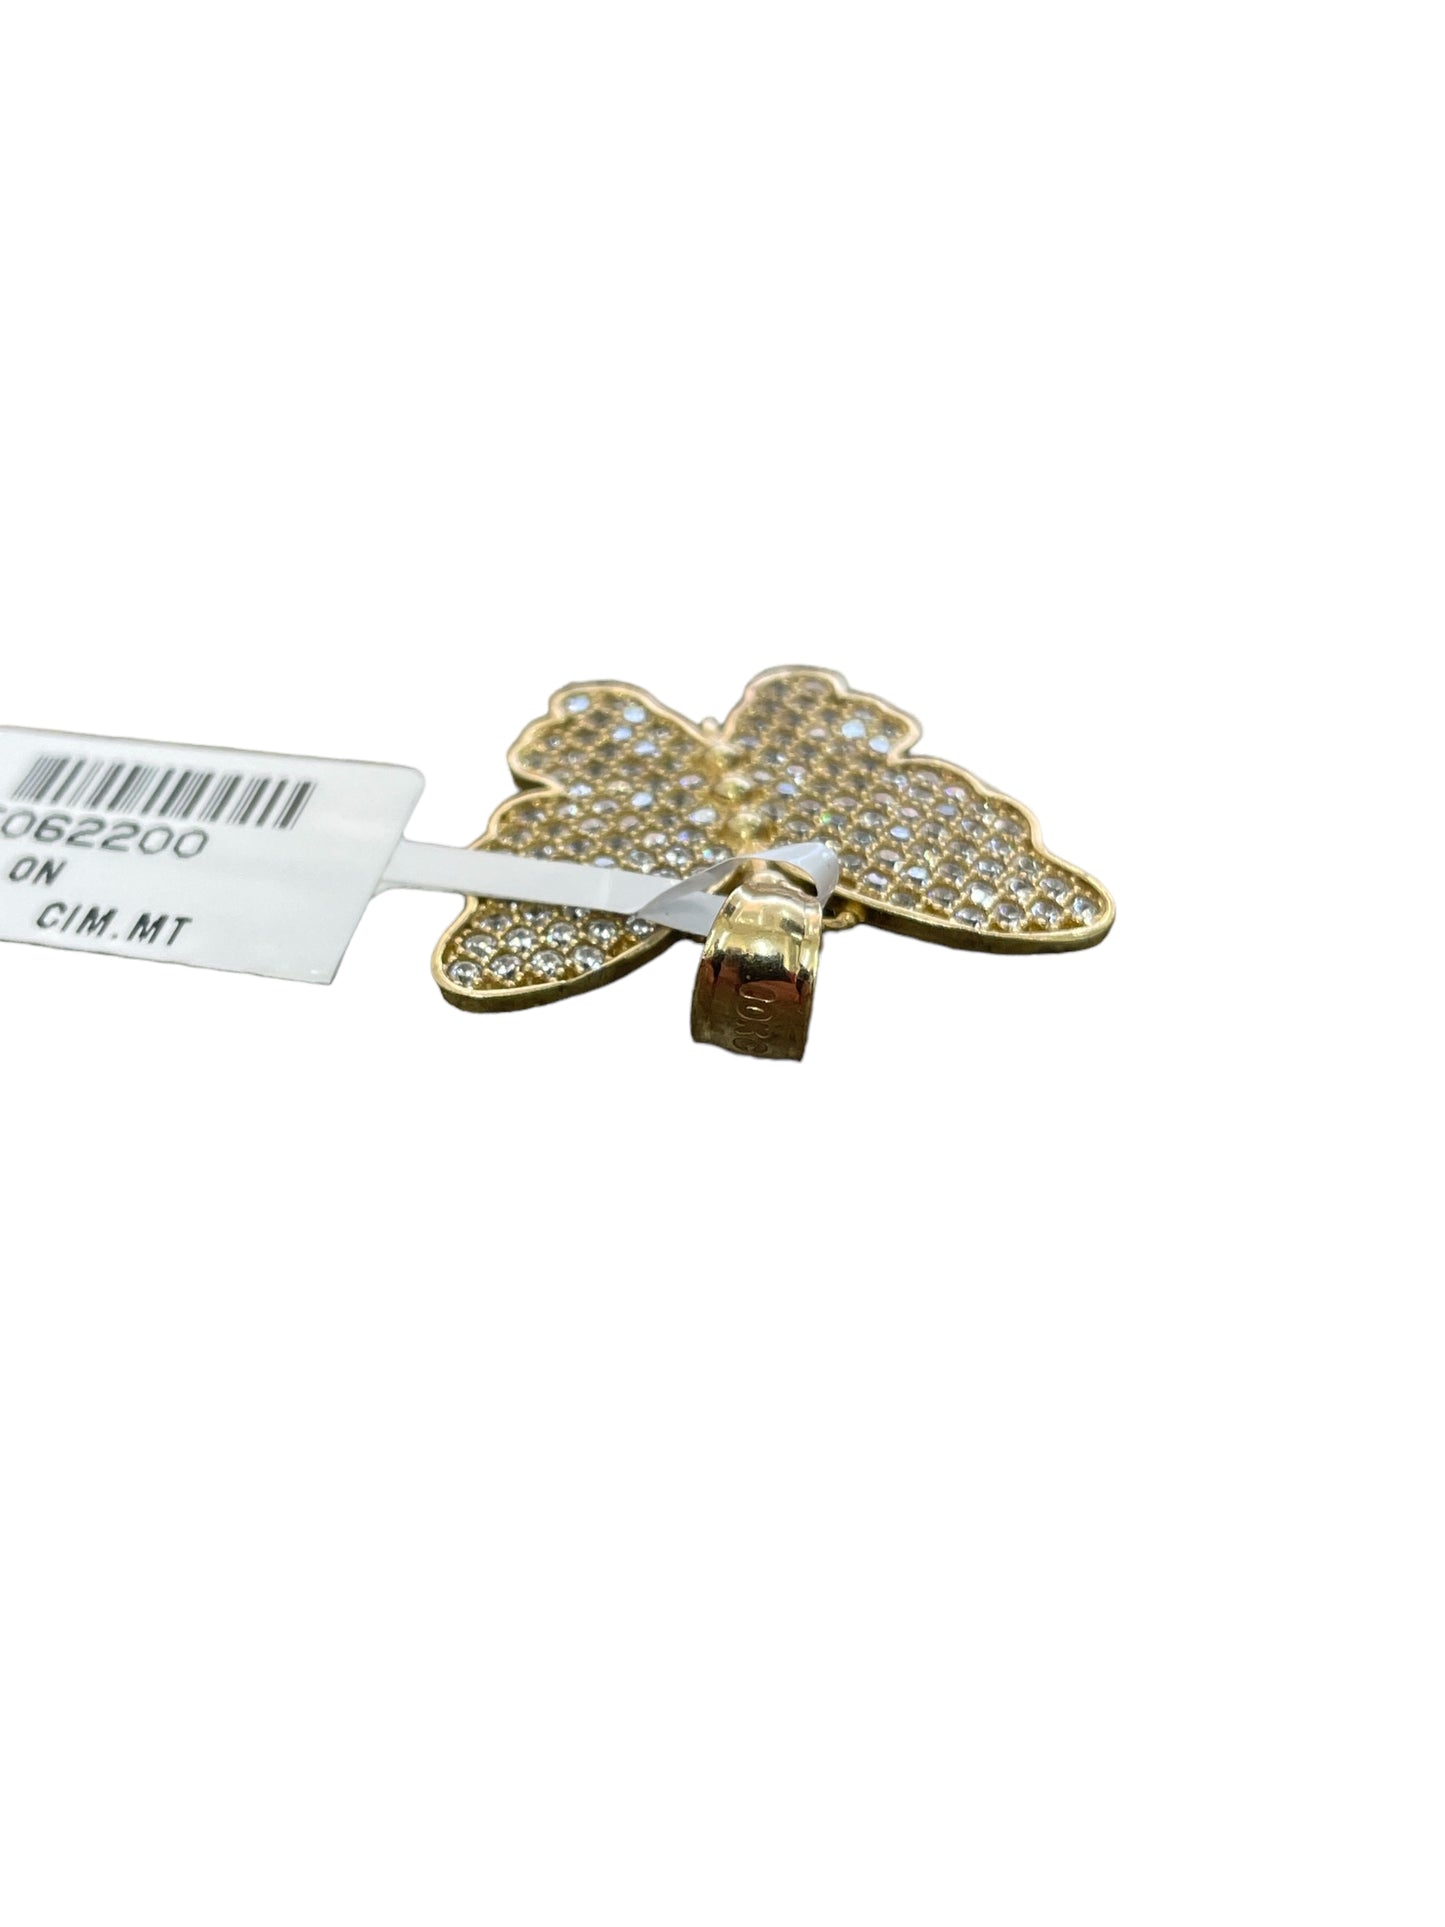 10K Yellow Gold Butterfly Charm (3.5 Grams)